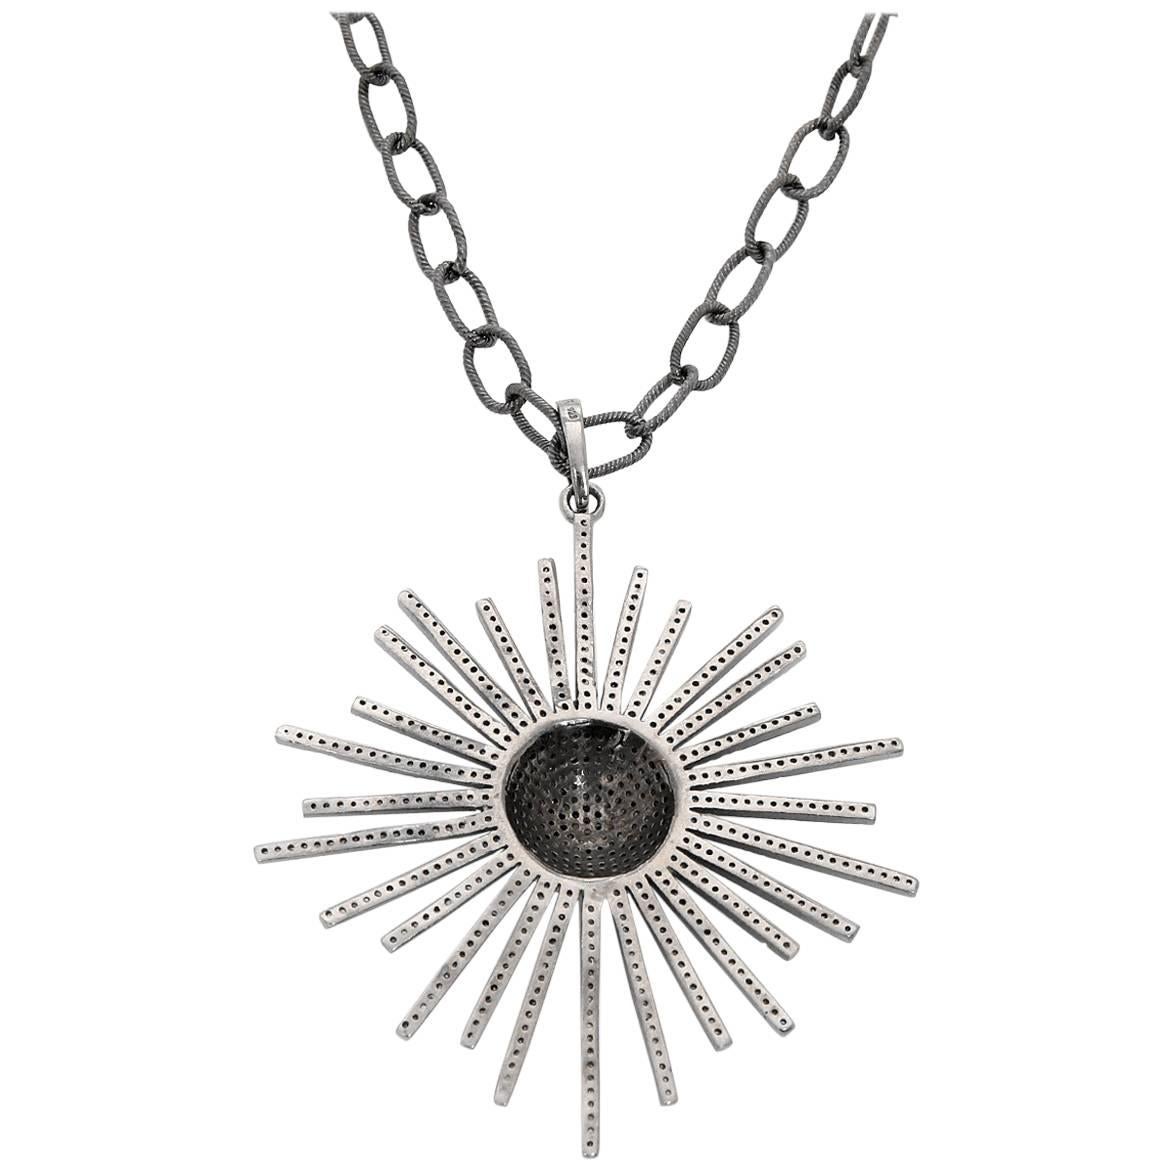 Sliced Diamond and Oxidized Sterling Silver Starburst Necklace - . Starburst Necklace measures apx. 17-inches in length with apx. 2 inch pendant drop. Total weight is 43.7 grams.